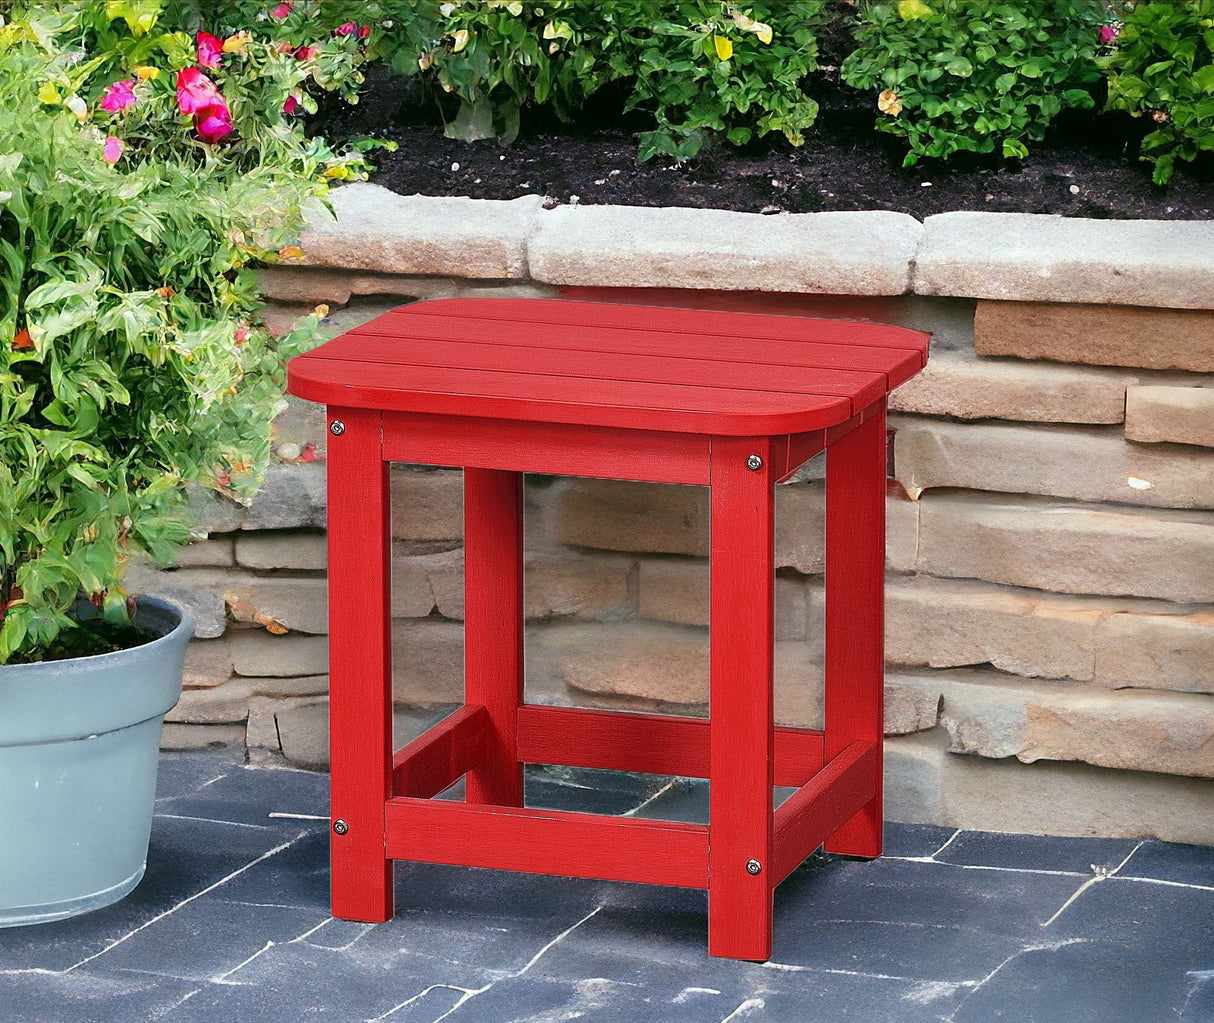 19" Red Resin Outdoor Side Table